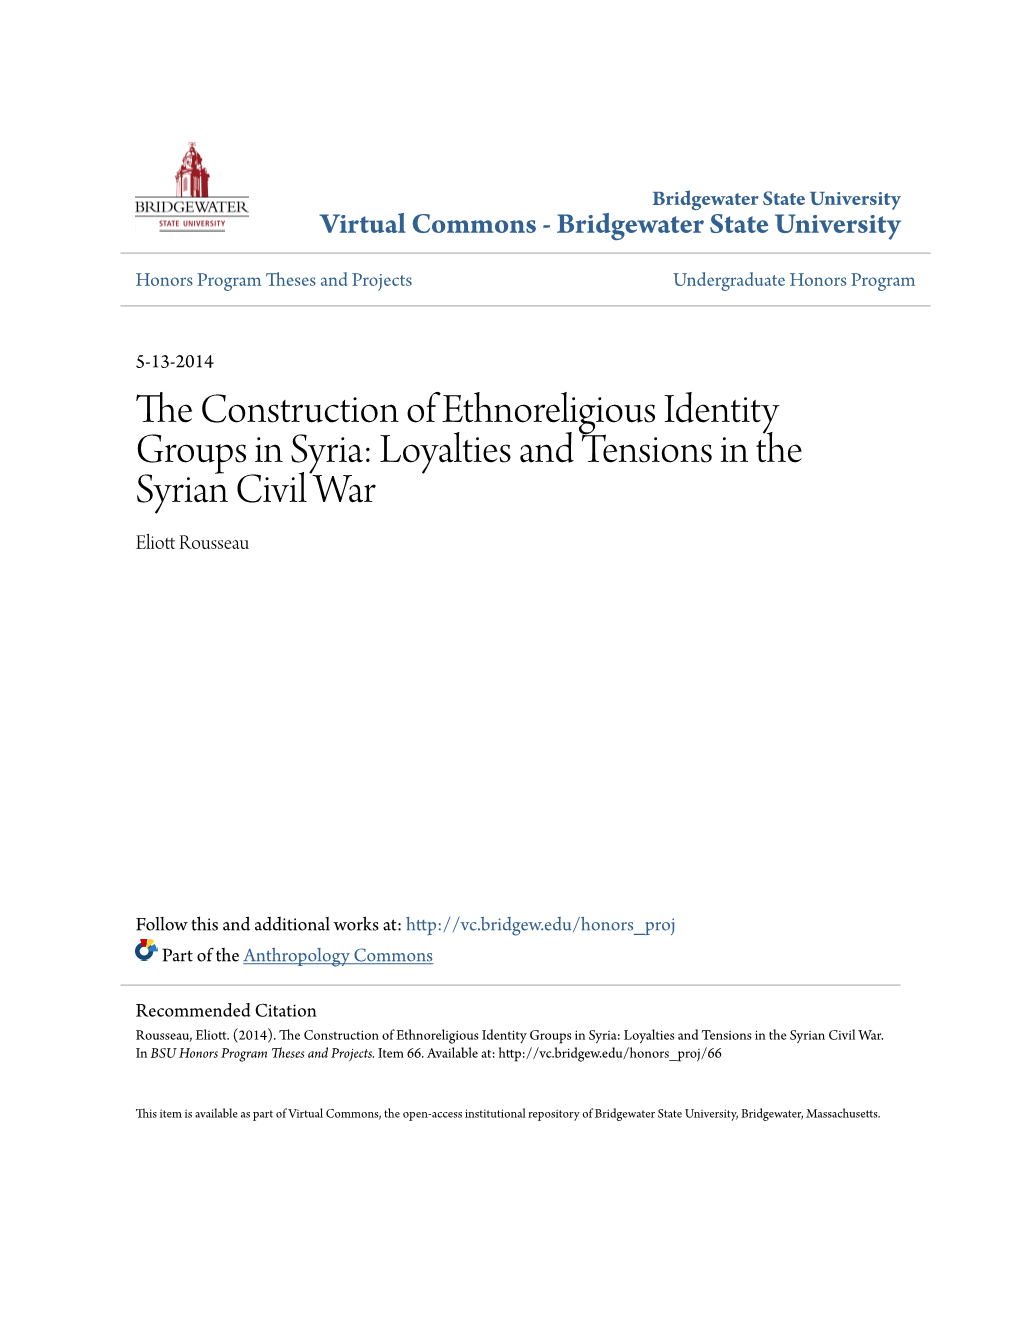 Loyalties and Tensions in the Syrian Civil War Eliott Rousseau